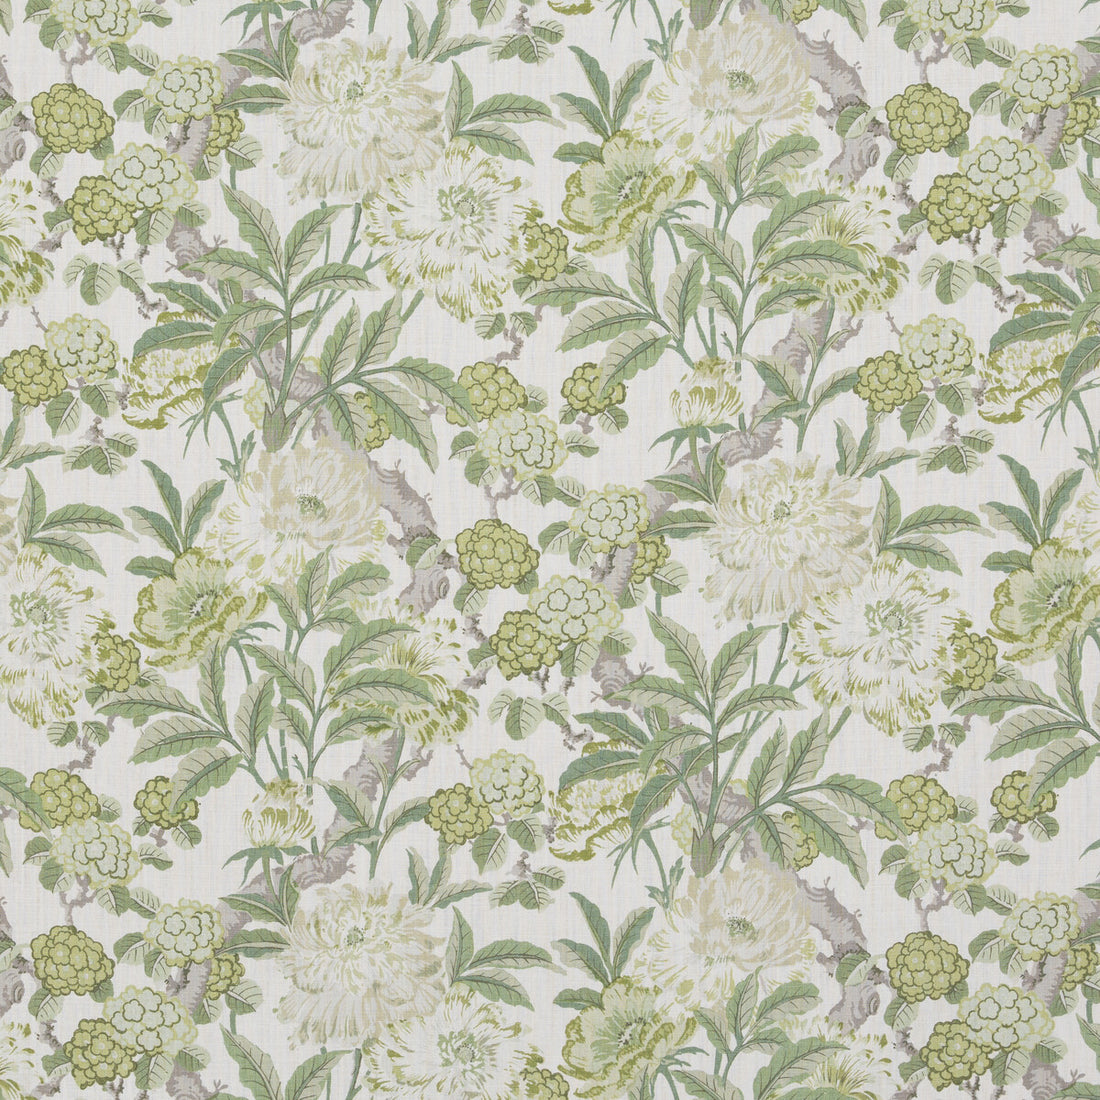 Summer Peony fabric in green color - pattern BP10950.3.0 - by G P &amp; J Baker in the Ashmore collection